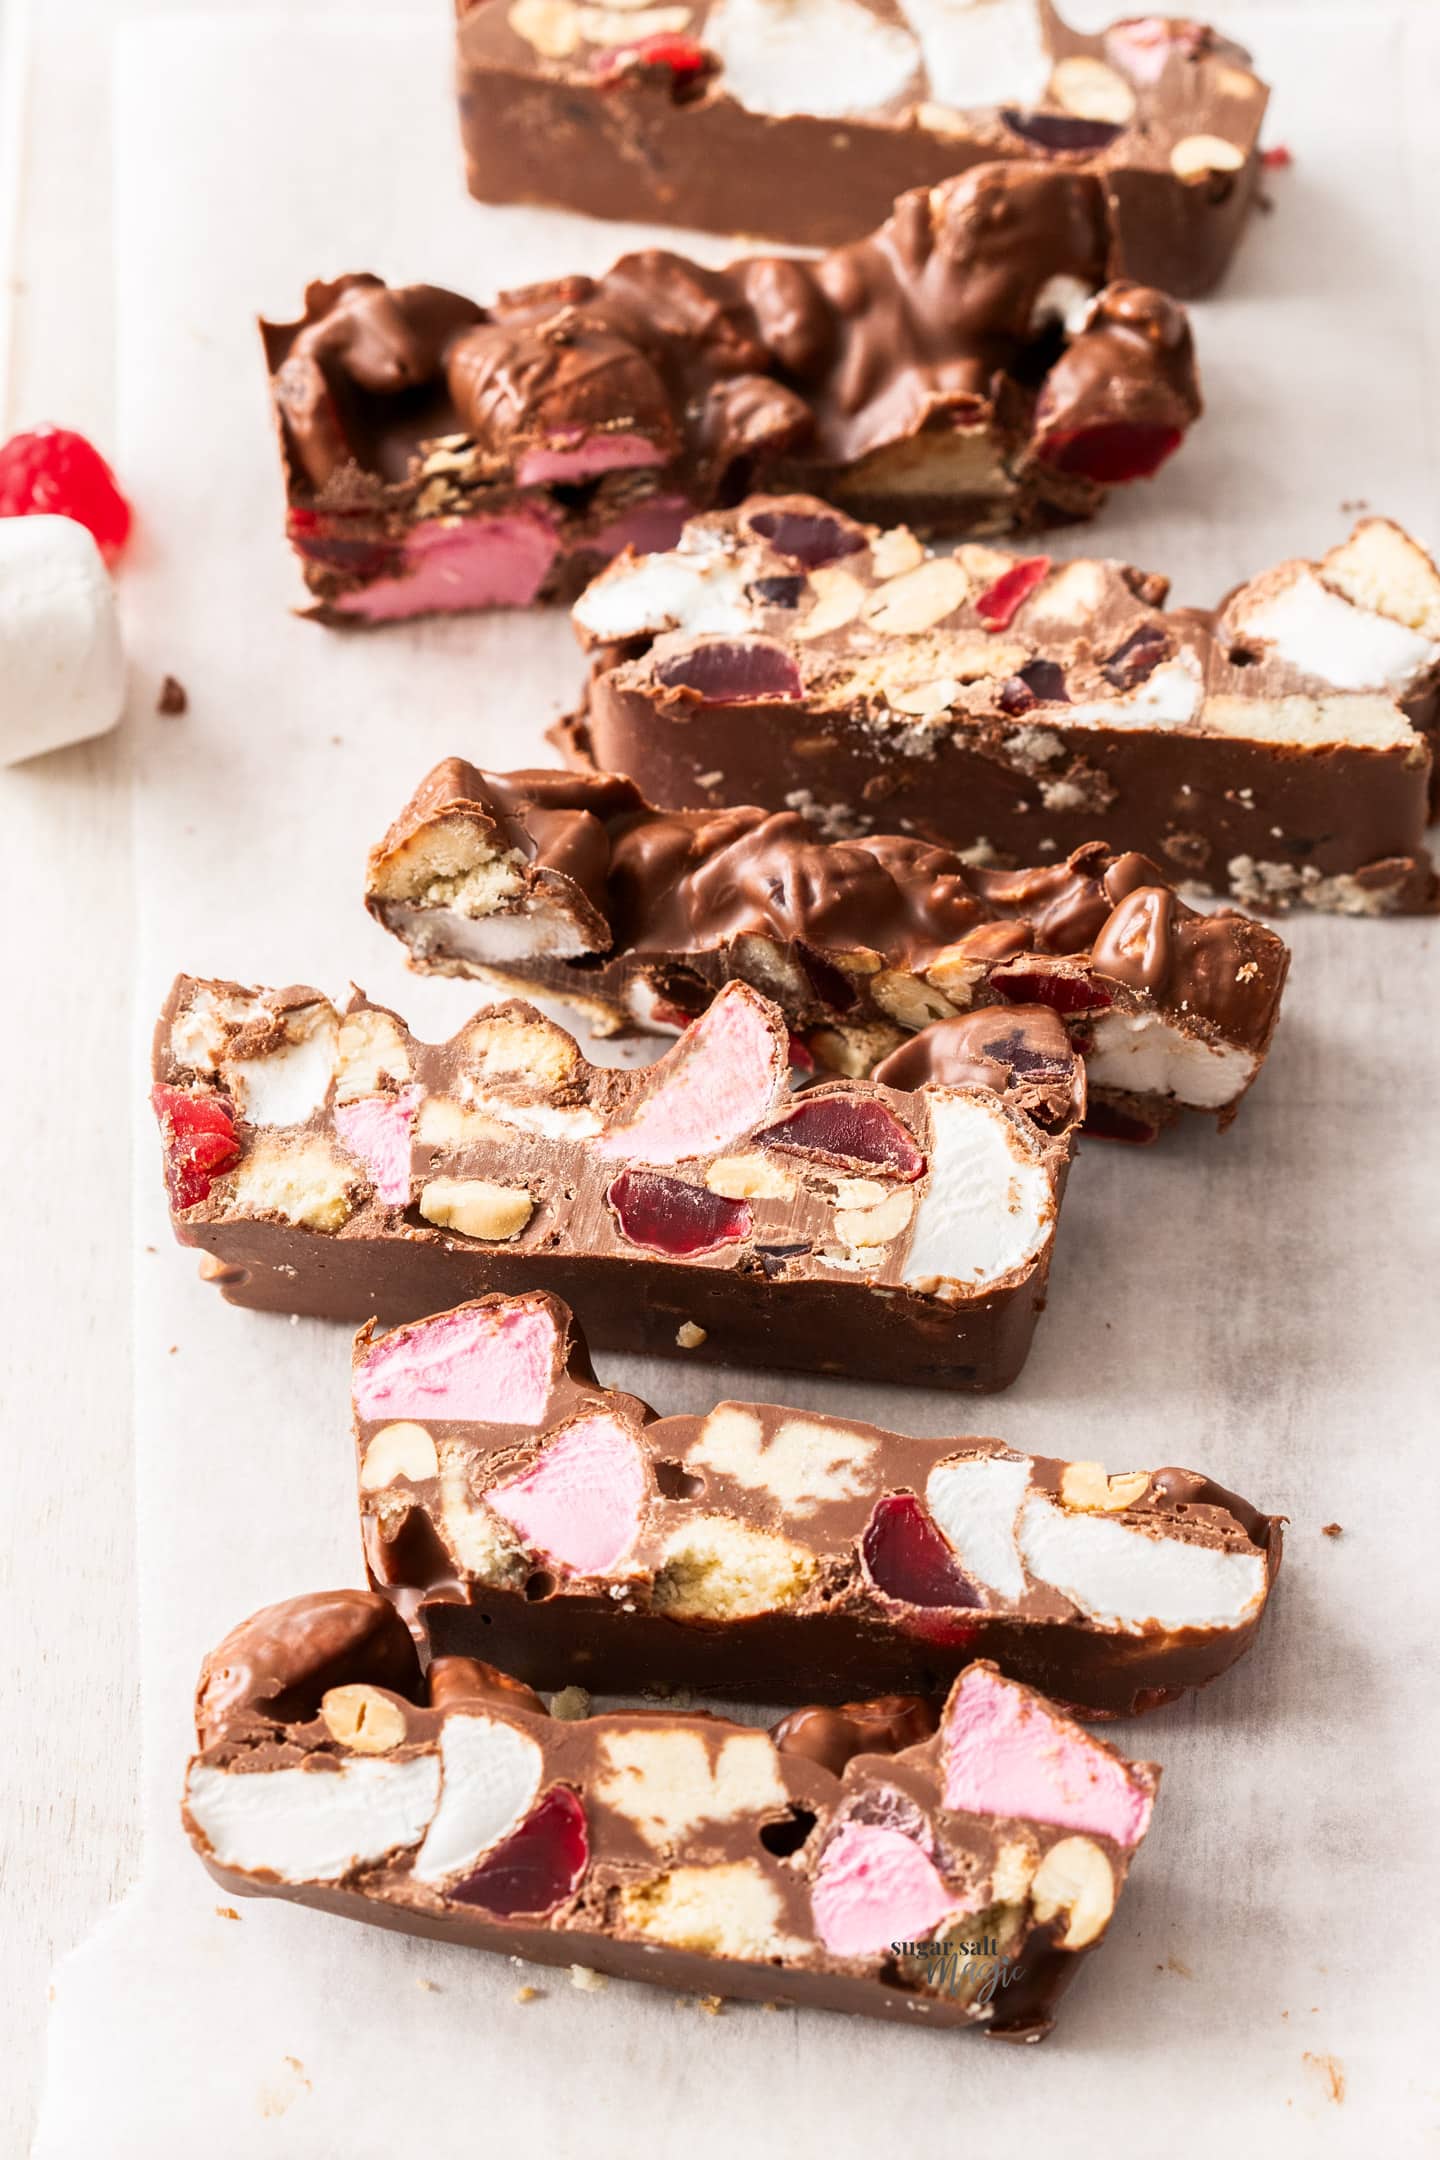 Slices of rocky road on a wooden board.